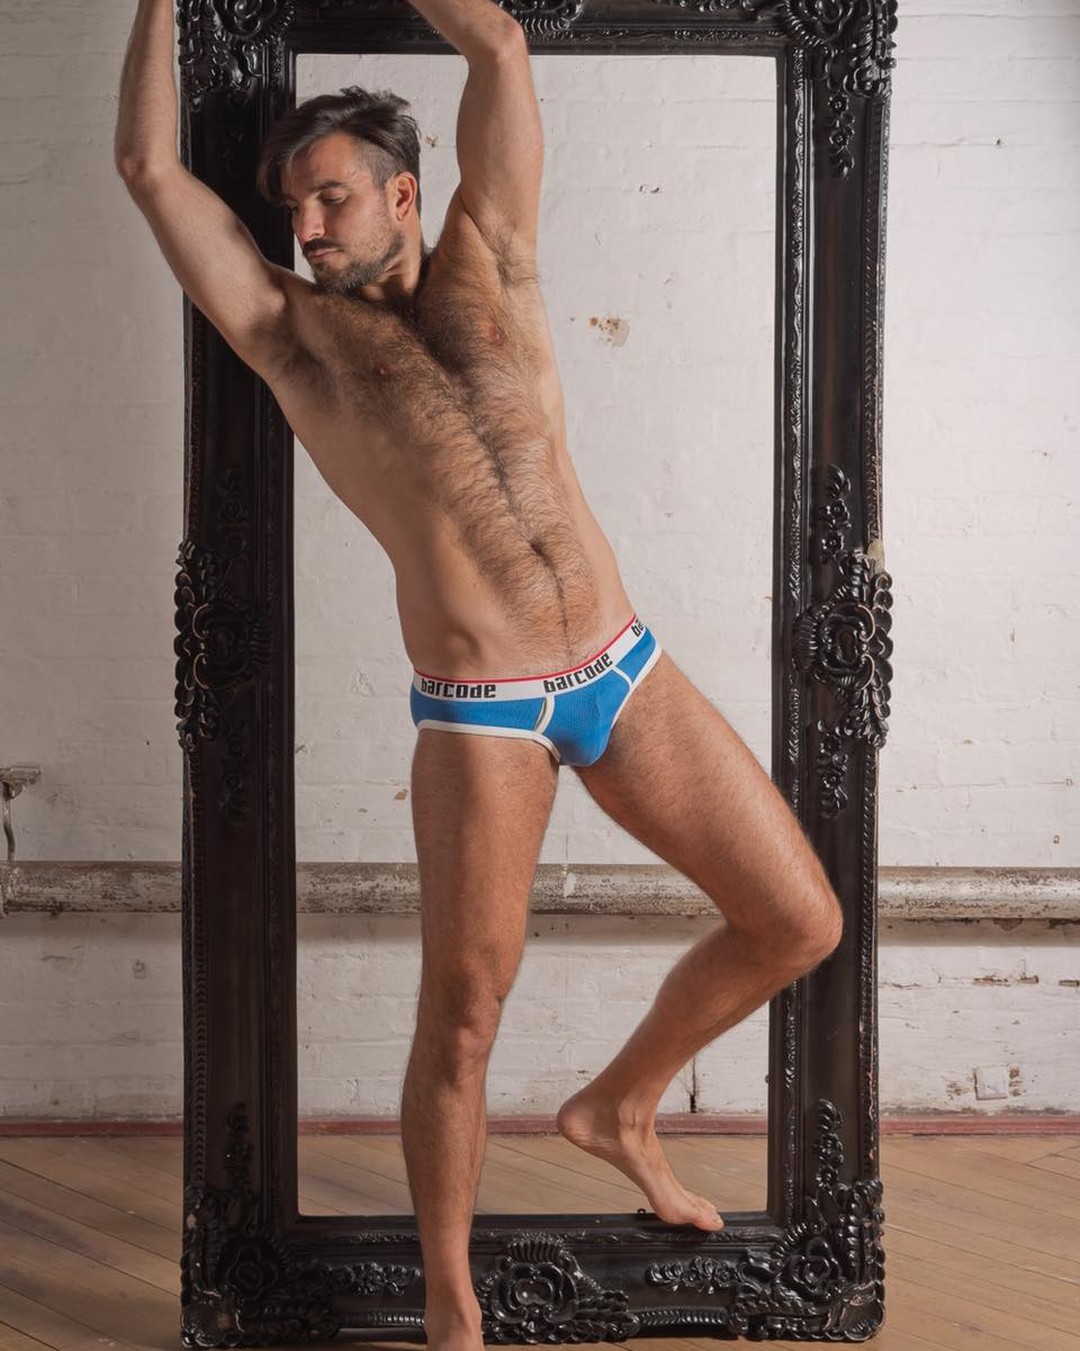 Check out The Frame, an exclusive editorial featuring model Rodolfo photographed by talented Markus Brehm and underwear by Barcode Berlin:
https://www.menandunderwear.com/2022/05/the-frame-rodolfo-by-brehm-barcode-berlin-underwear.html